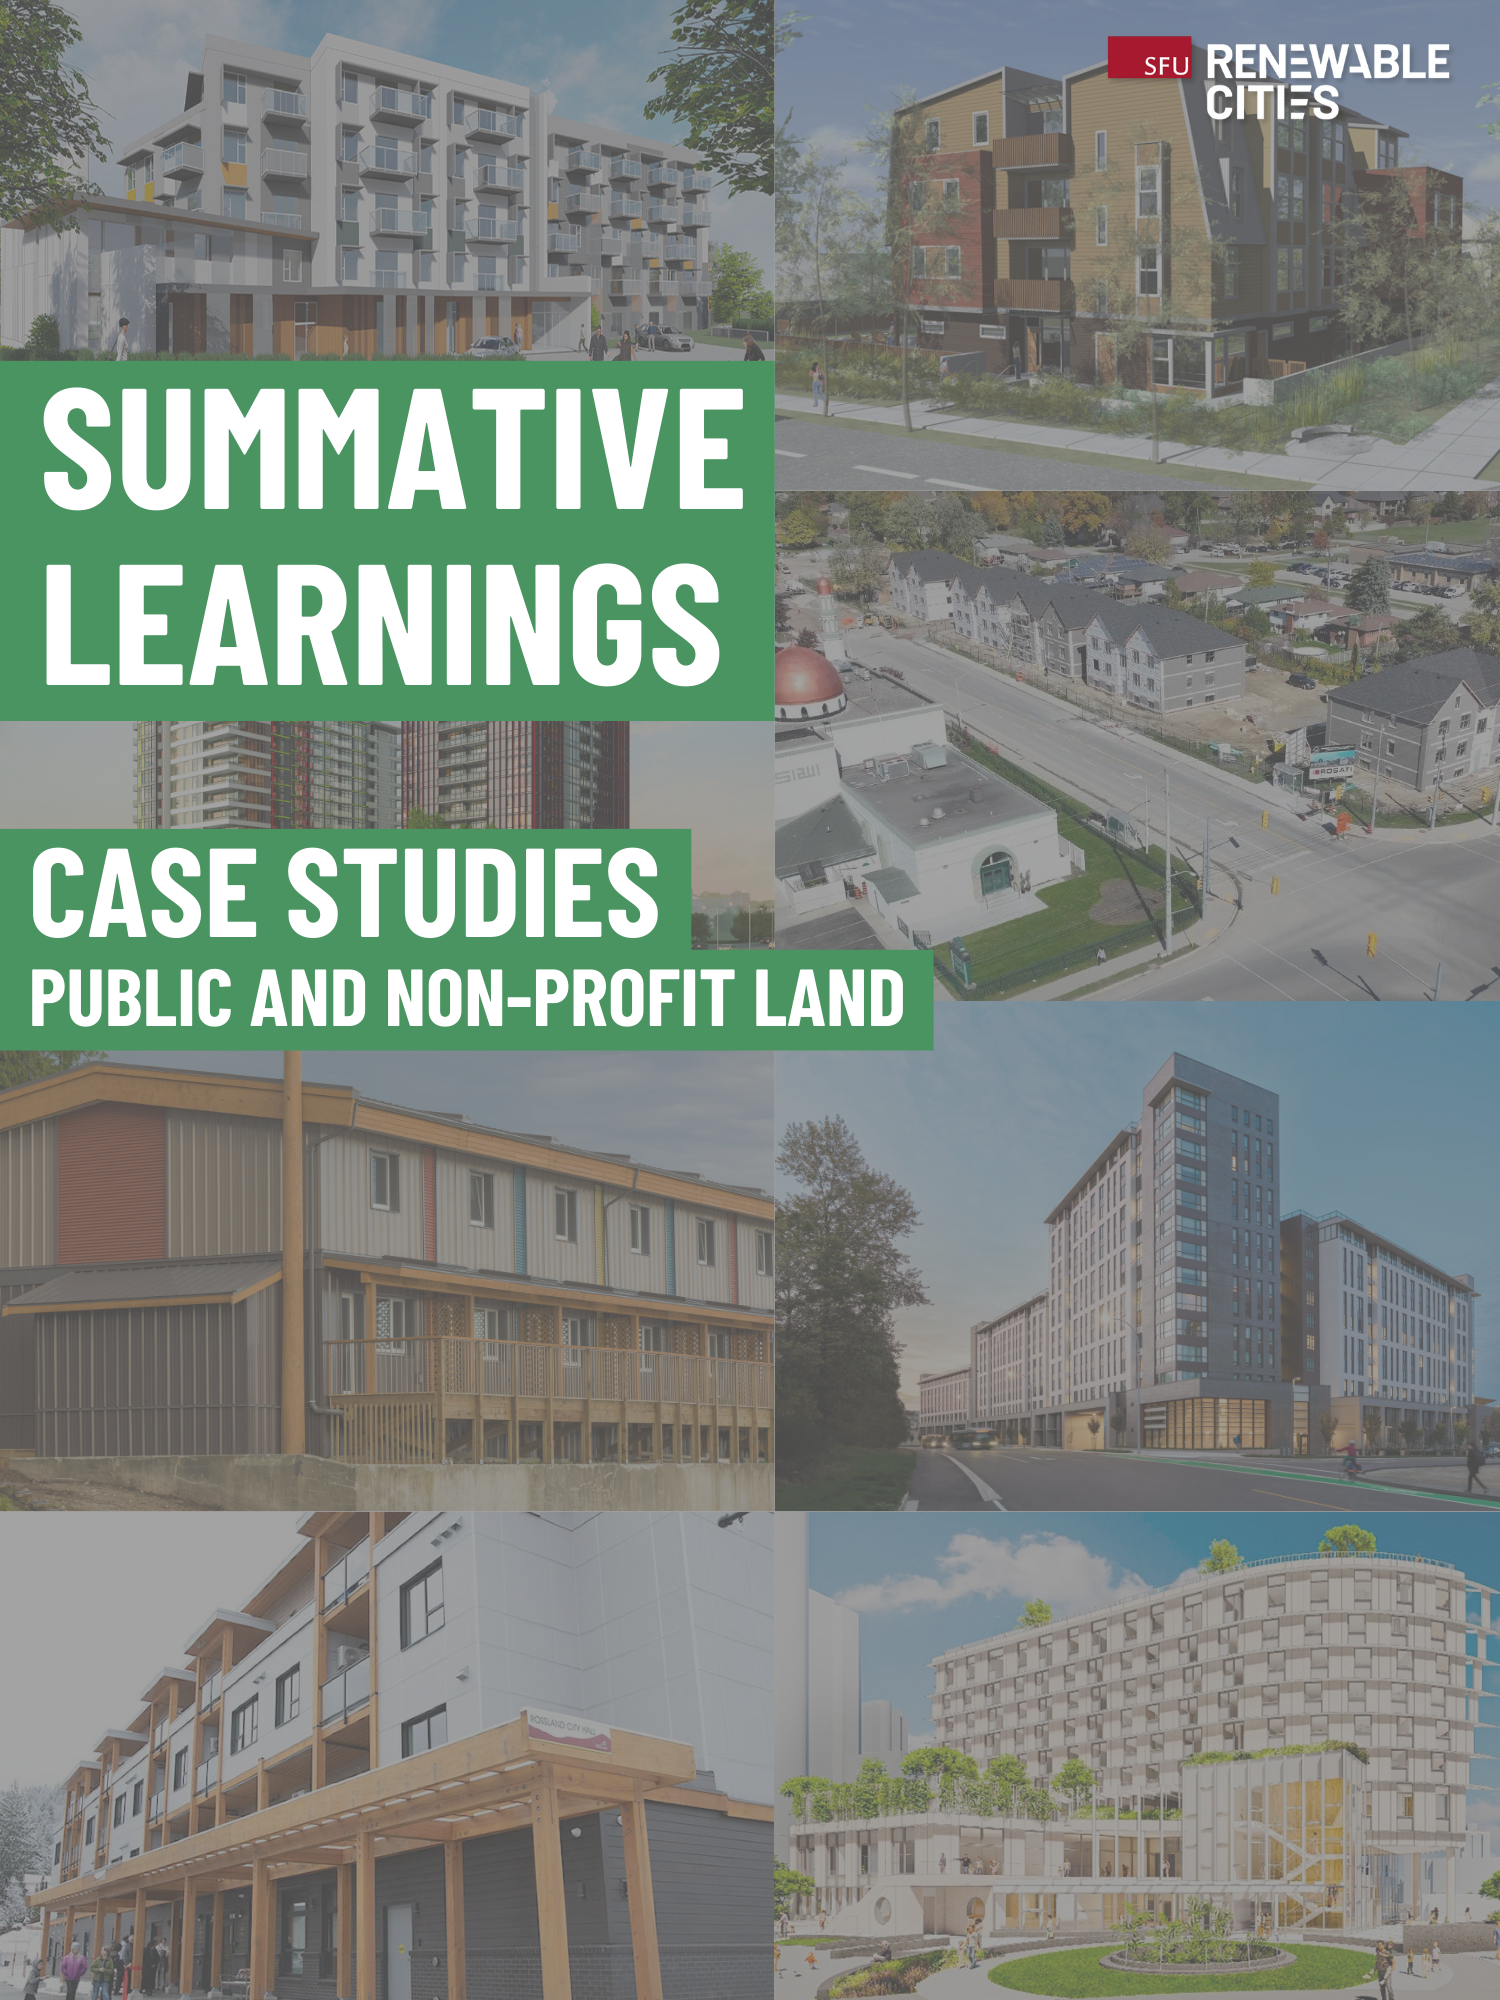 3:4 website images - summative-learnings-cover